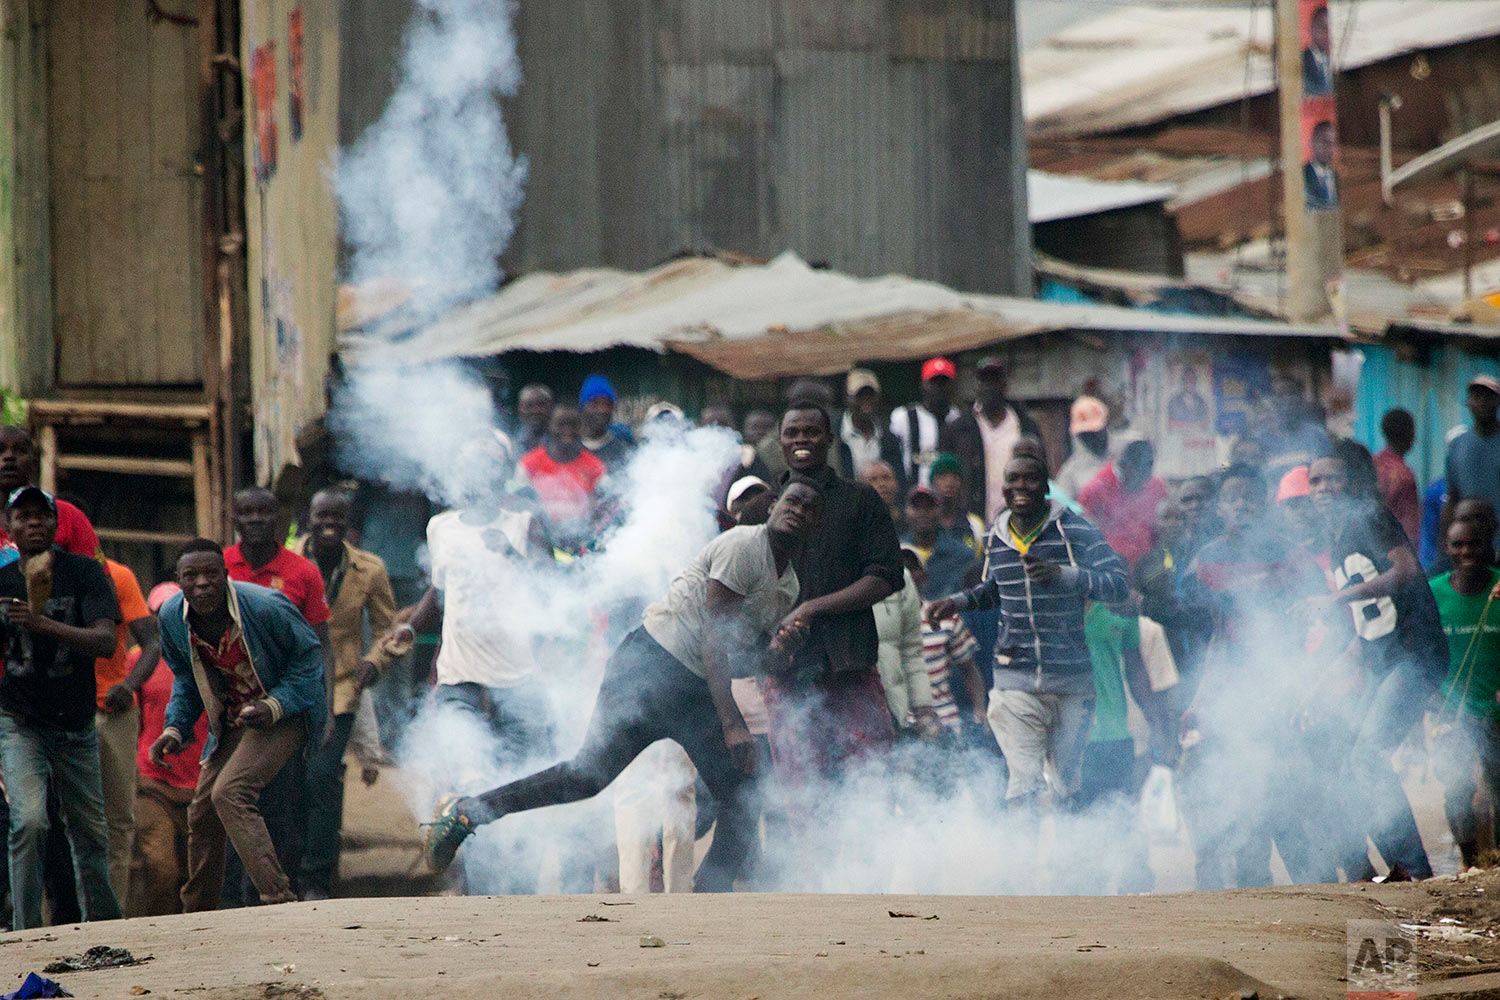  Supporters of Kenyan opposition leader and presidential candidate Raila Odinga throw back a tear gas canister at Kenyan security forces in the Mathare slum of Nairobi, Wednesday, Aug. 9, 2017. Odinga alleges that hackers manipulated the Tuesday elec